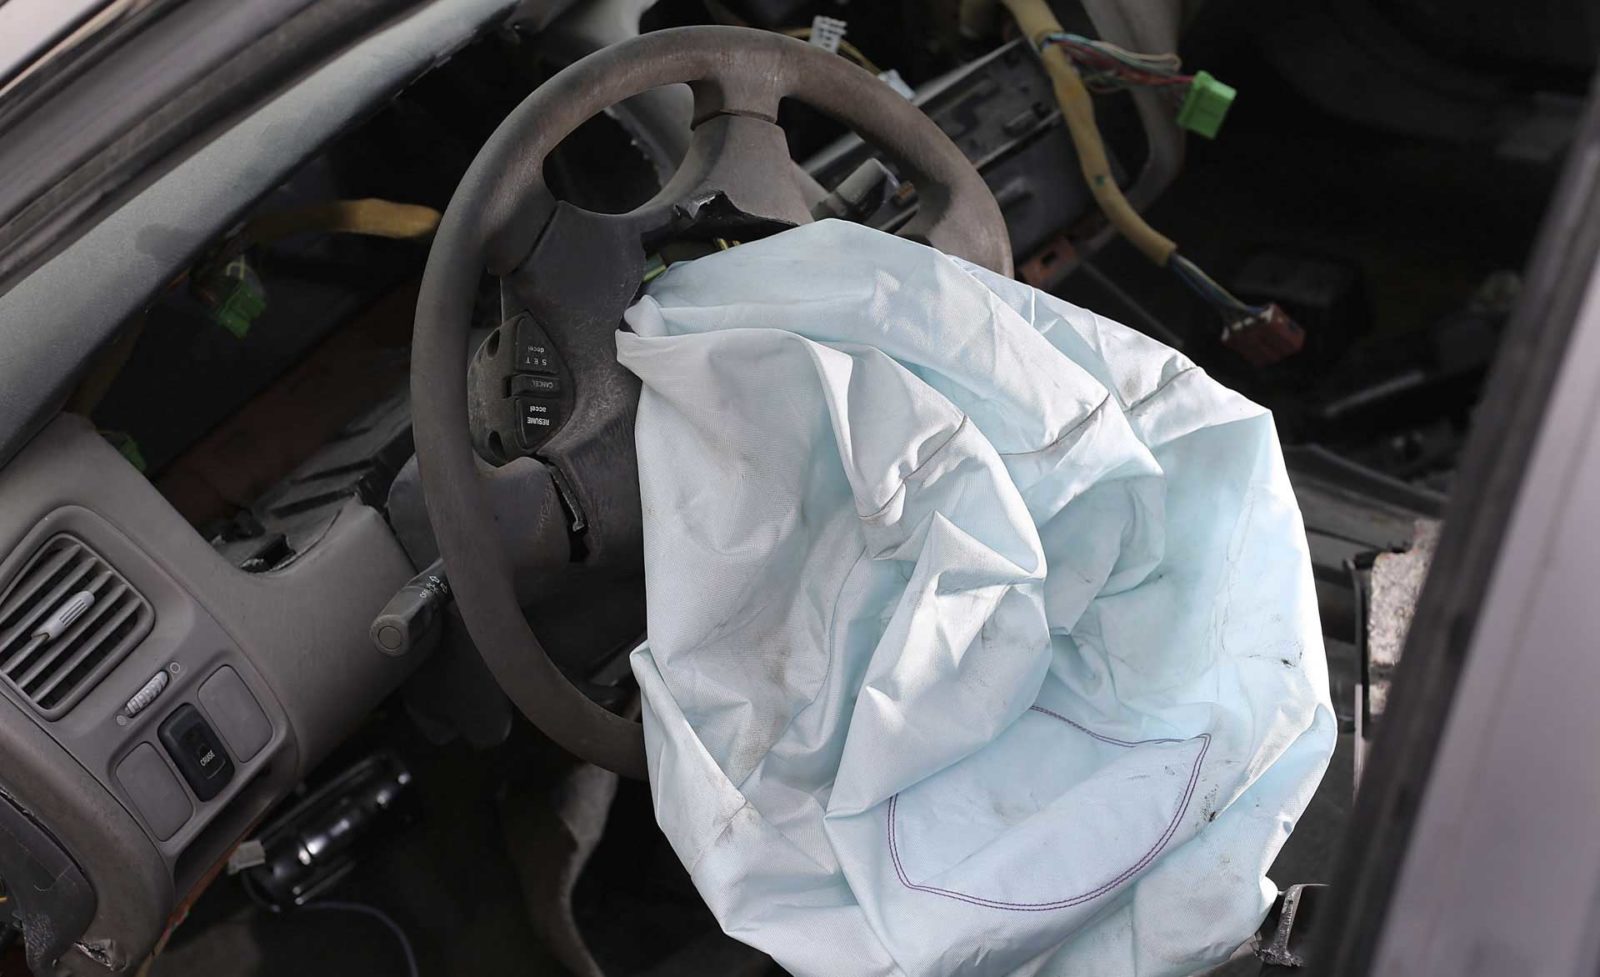 Takata Airbag Recall Lawyer | Auto Recall Lawyer | Car Accident Lawyer